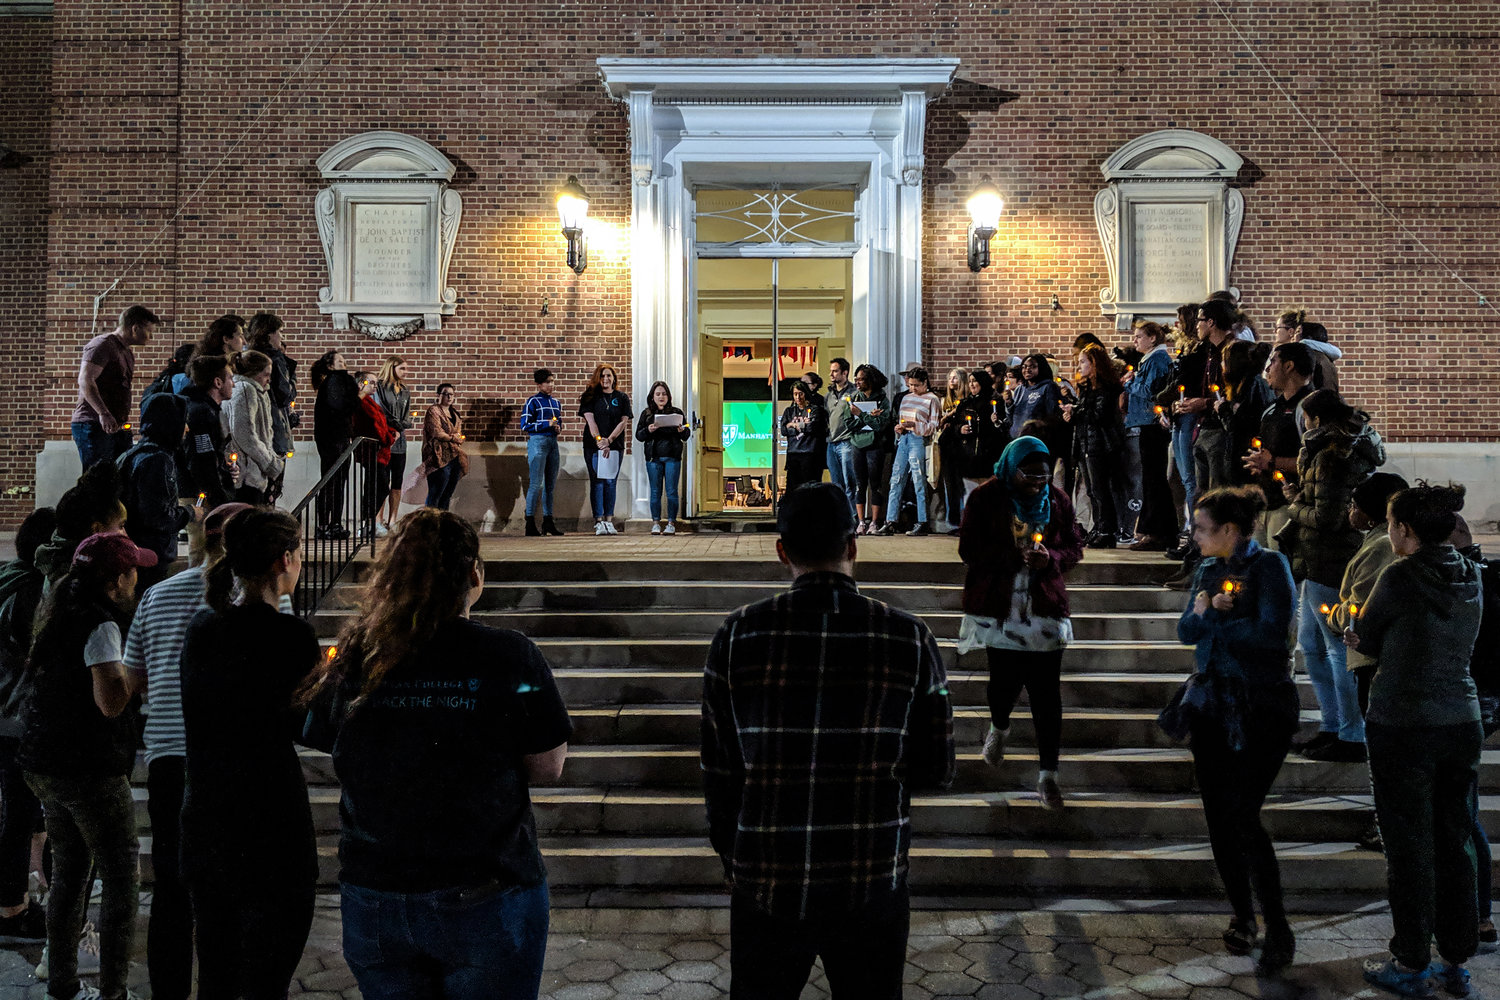 The Lasallian Women and Gender Resource Center at Manhattan College was started five years ago partially to address issues with the college’s consent code, says faculty co-director Jordan Pascoe. The center supports state Sen. Alessandra Biaggi’s bill intended to strengthen legal protections for rape and sexual assault victims who also chose to drink.